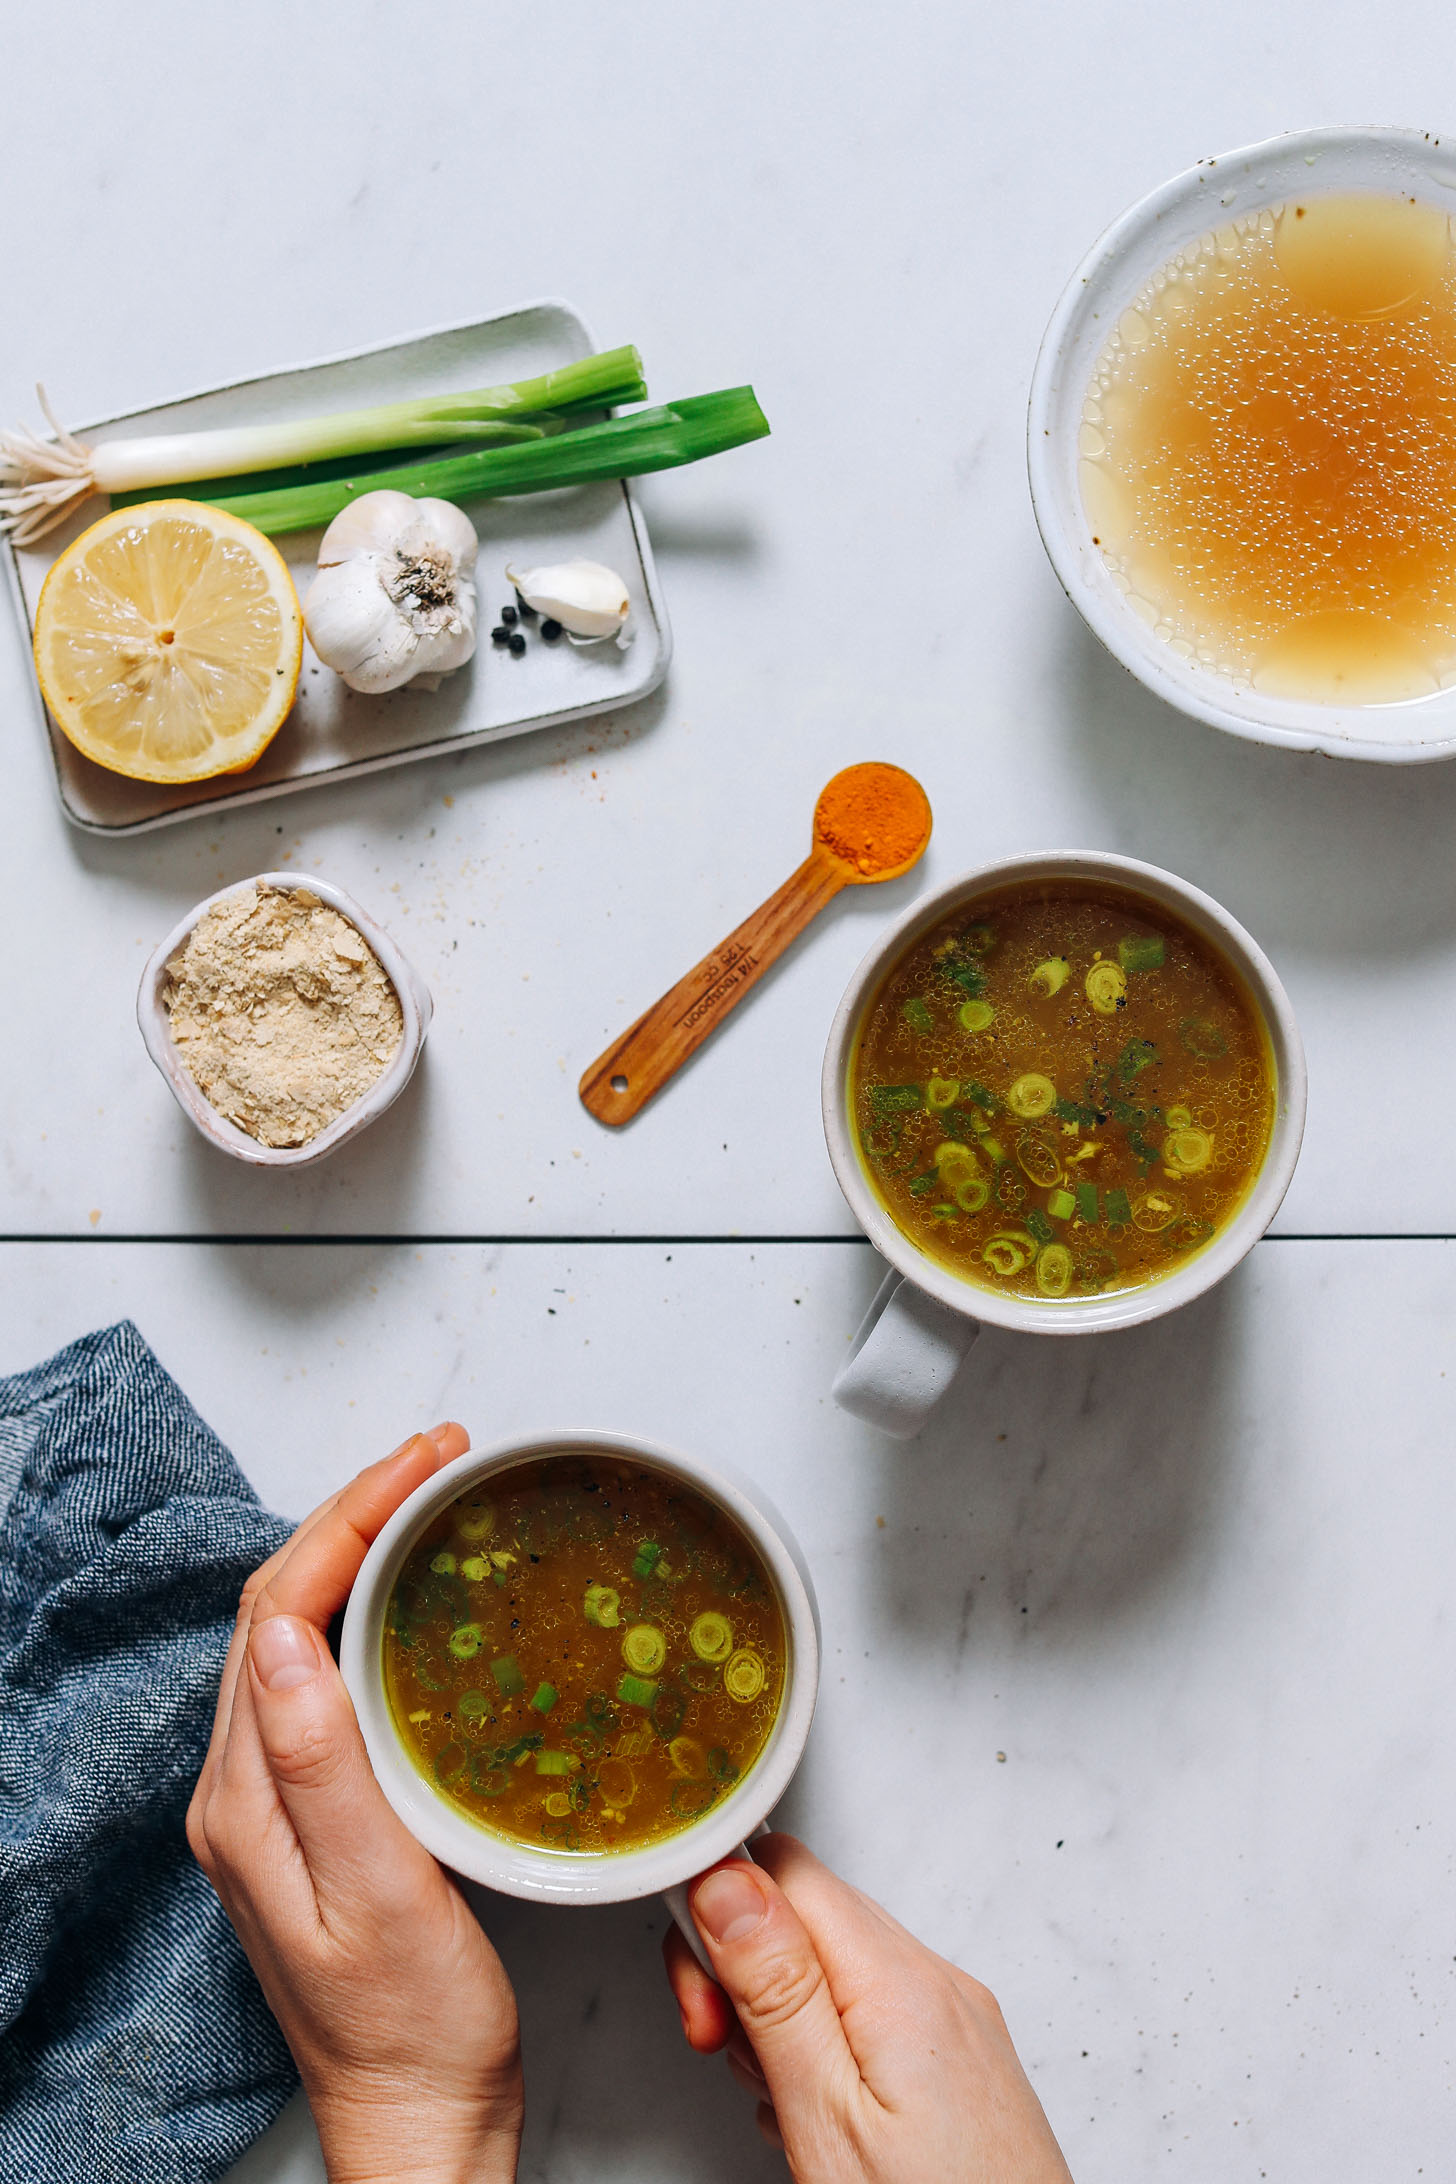 Holding the handle of a mug of our Bone Broth Tonic surrounded by ingredients used to make it